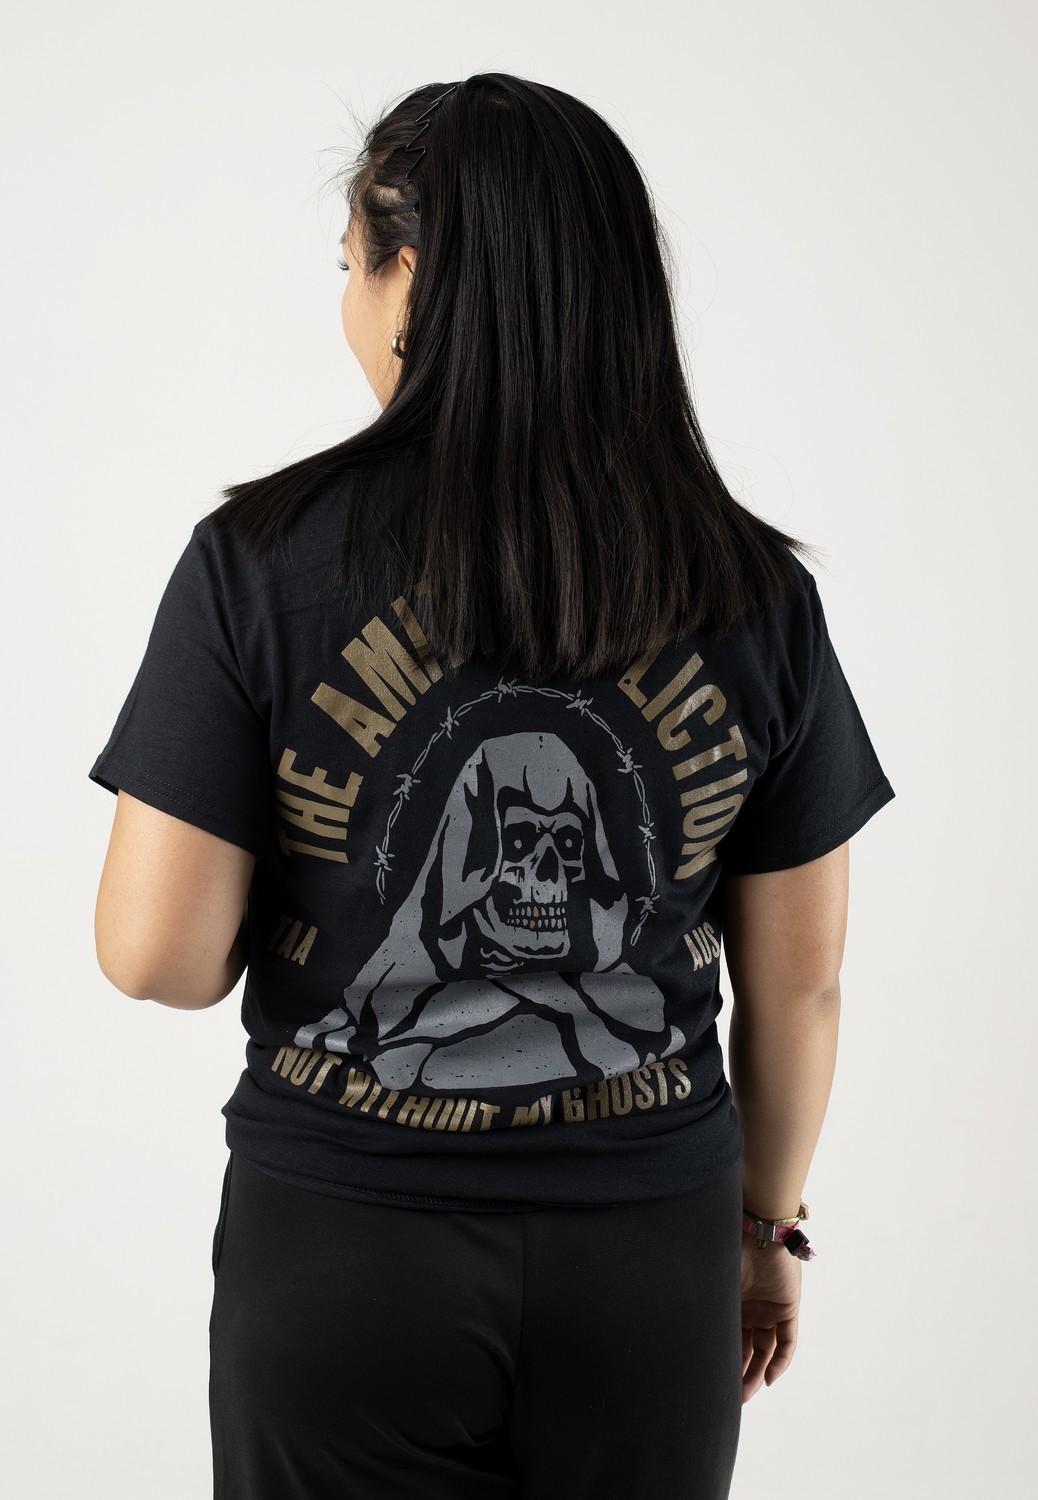 The Amity Affliction - NWMG Reaper - - T-Shirts